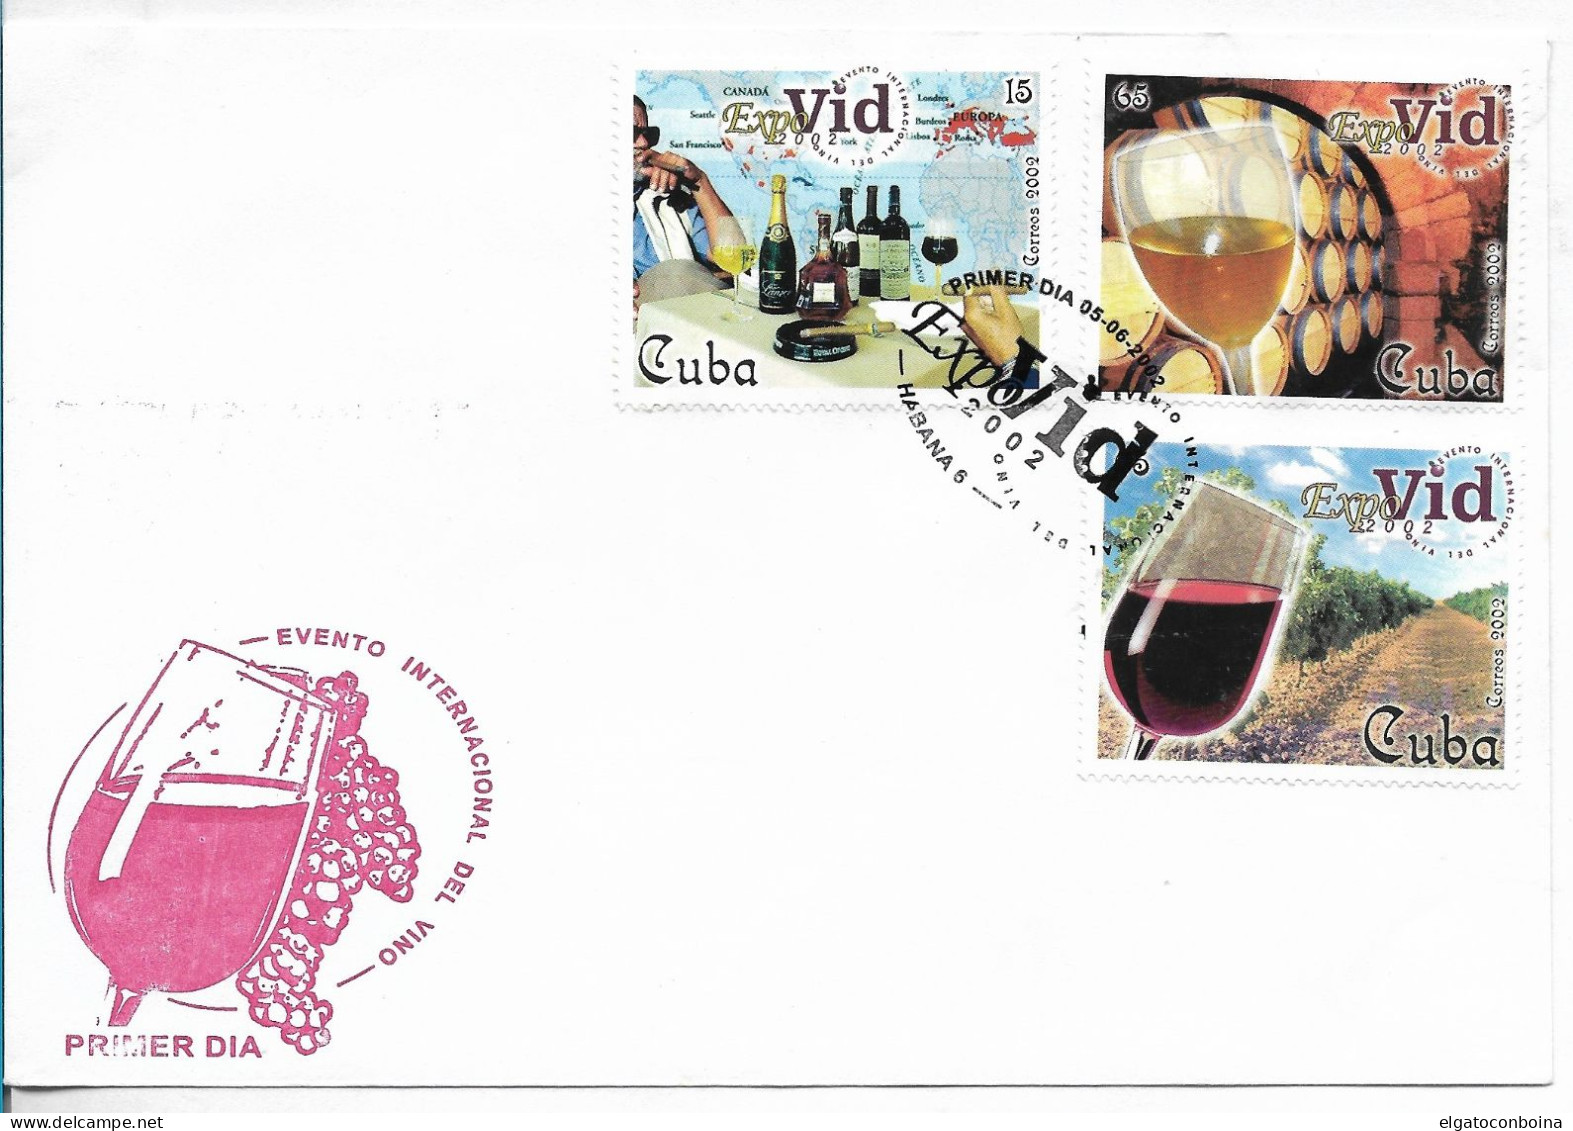 CUBA 2002 AGRICULTURE WINE BOTTLES 3 VALUES ON FDC COVER - FDC